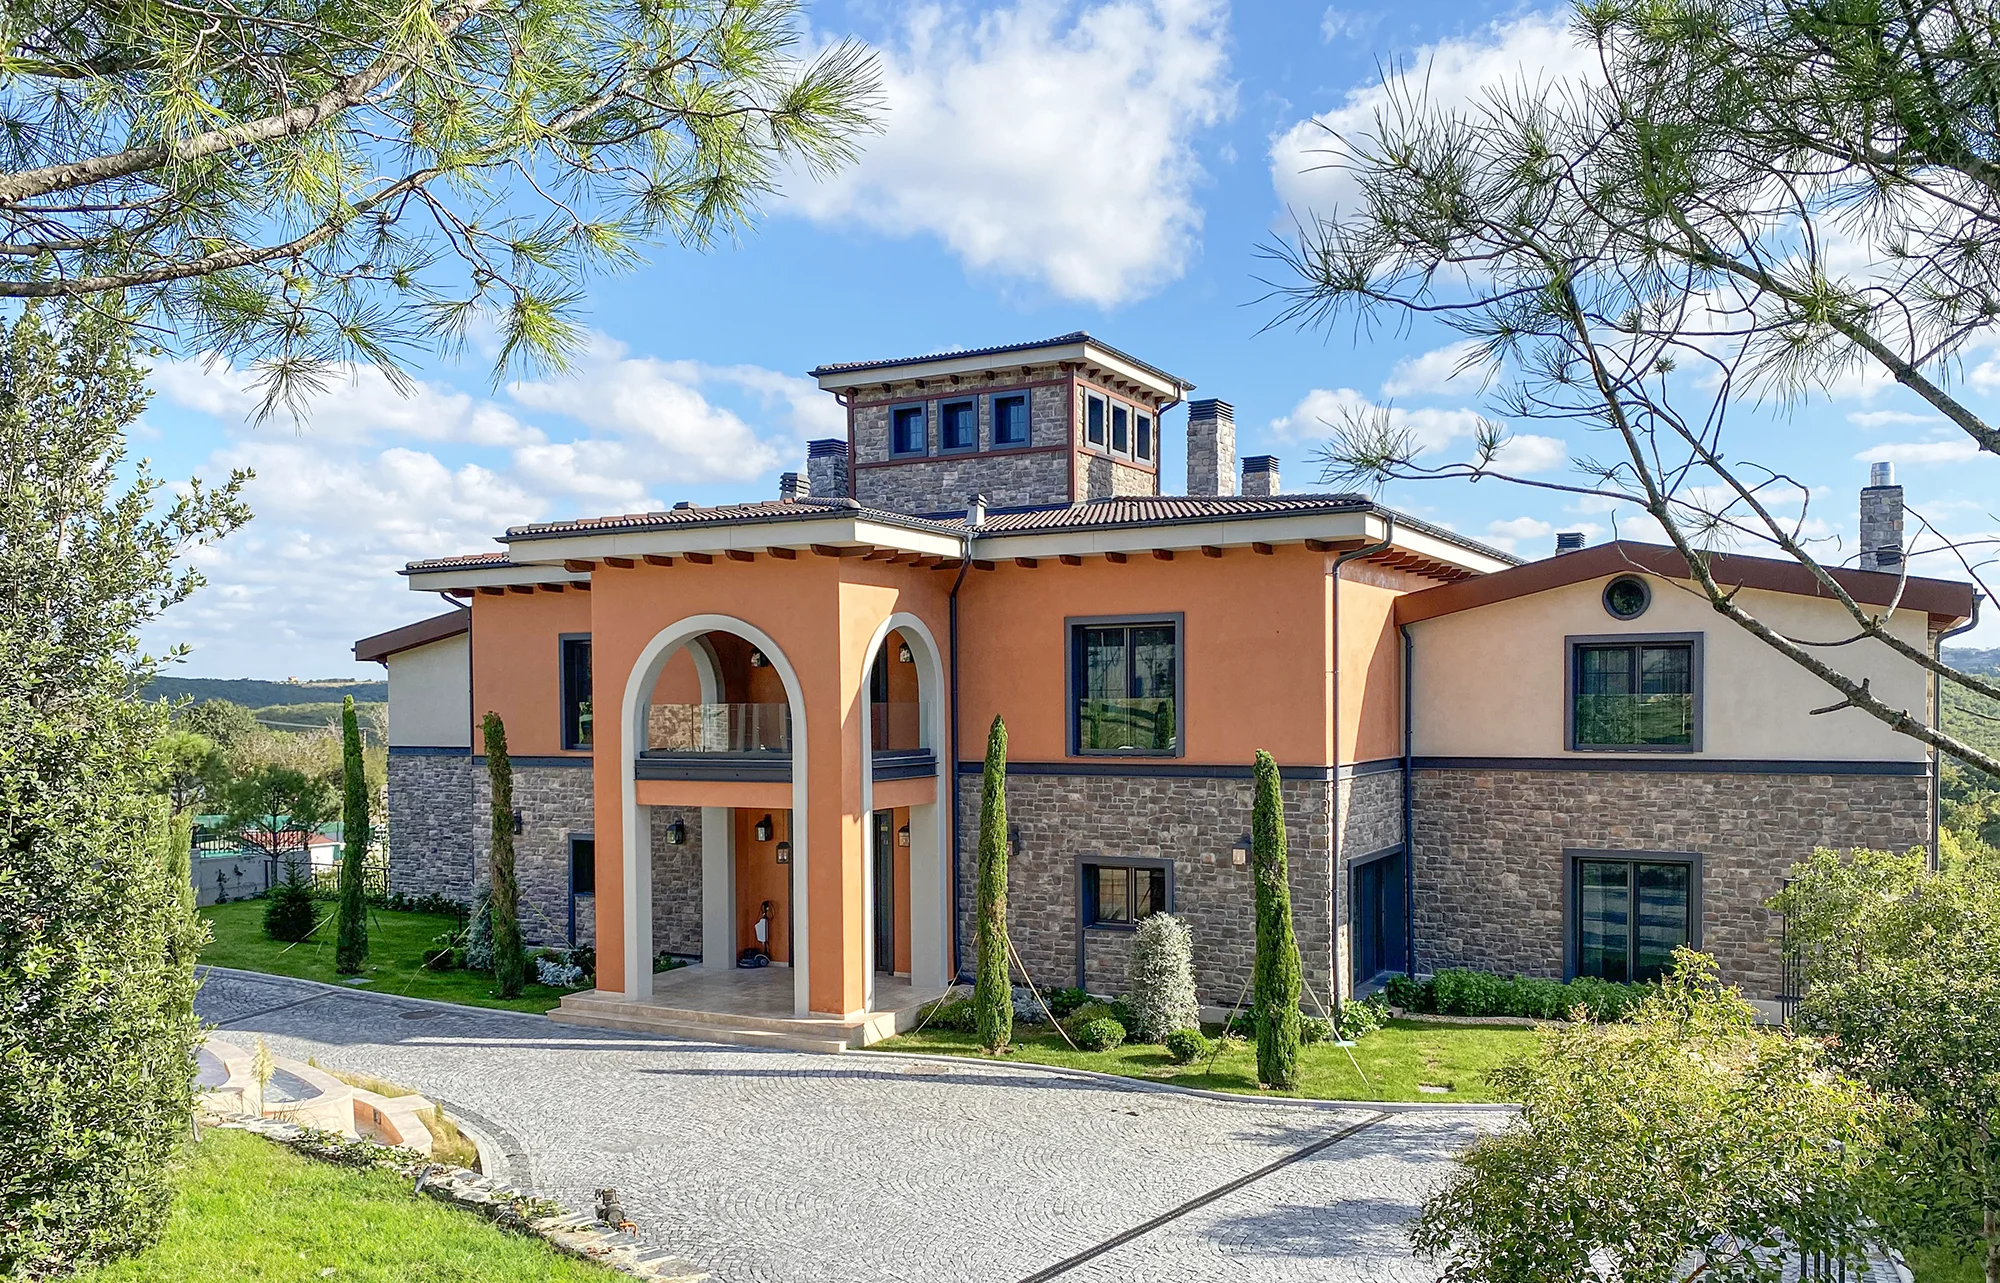 İtaian villa with manufactured stone walls